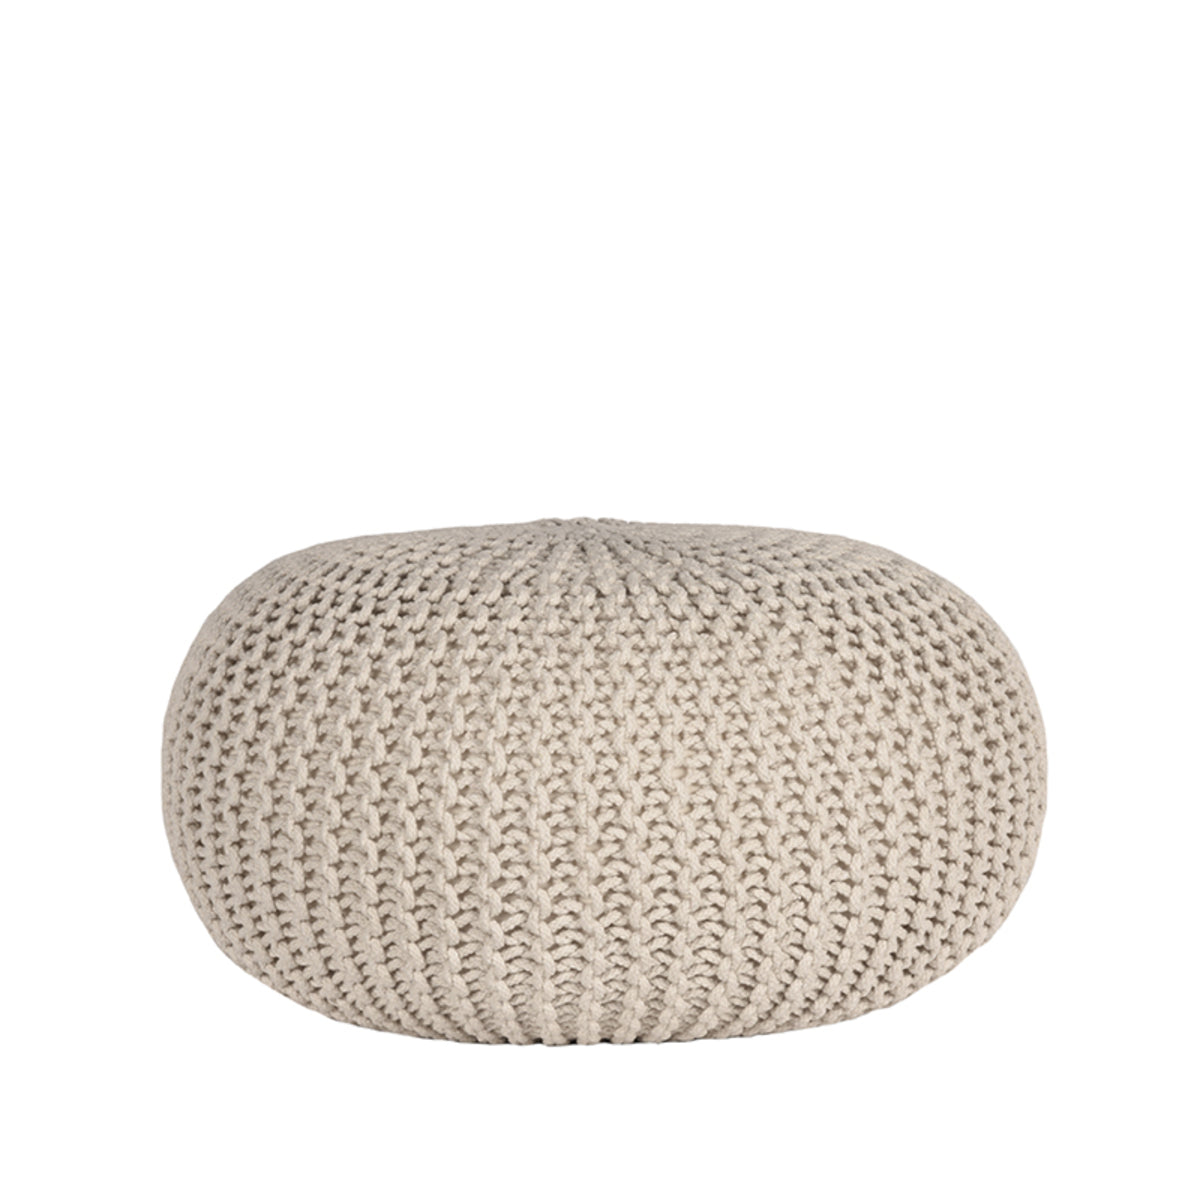 LABEL51 Pouf Knitted - Natural - Cotton - L